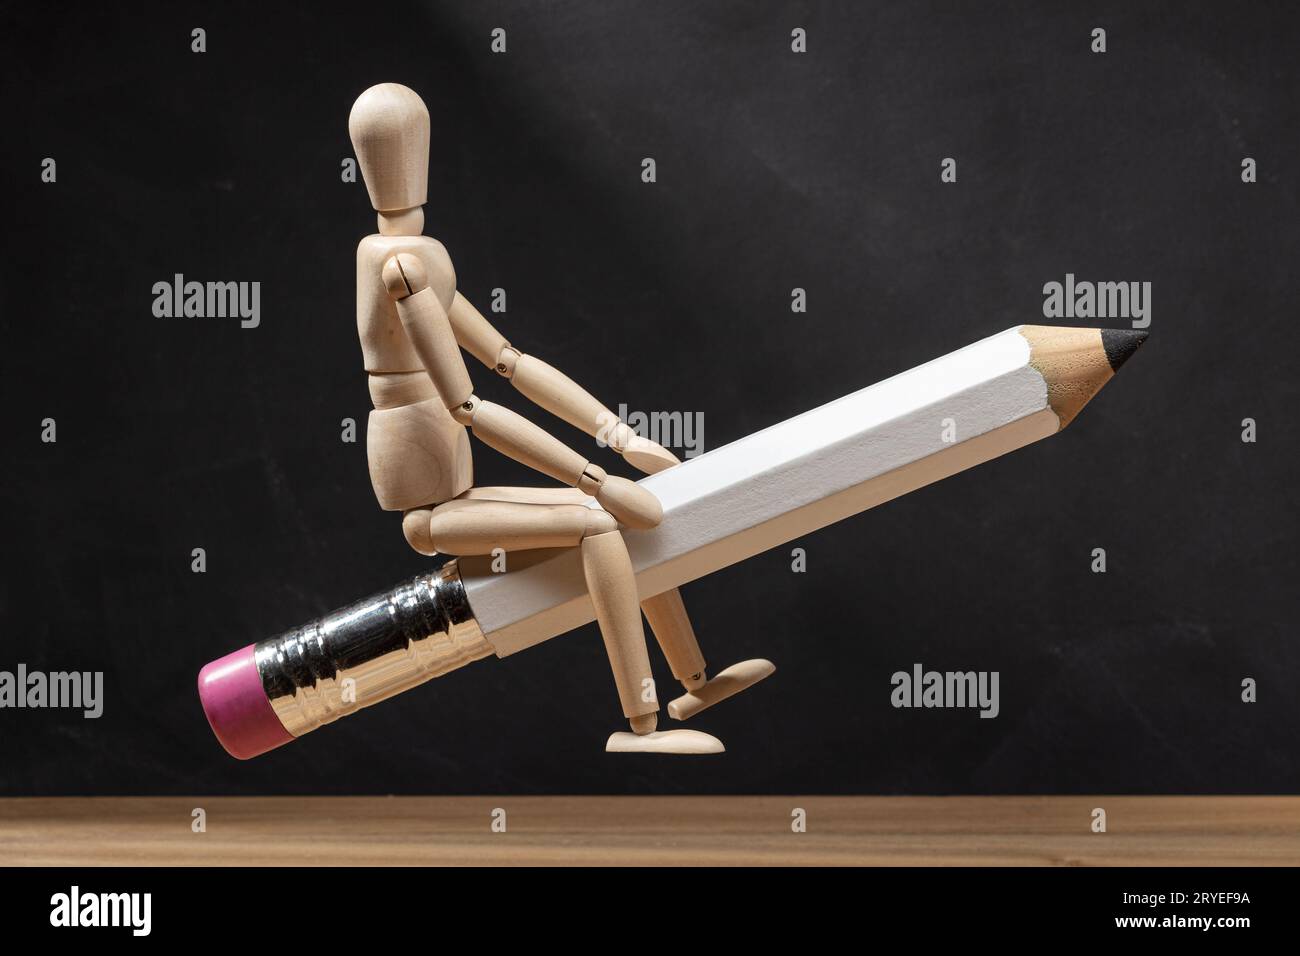 Wooden mannequin riding a pencil like a rocket Stock Photo